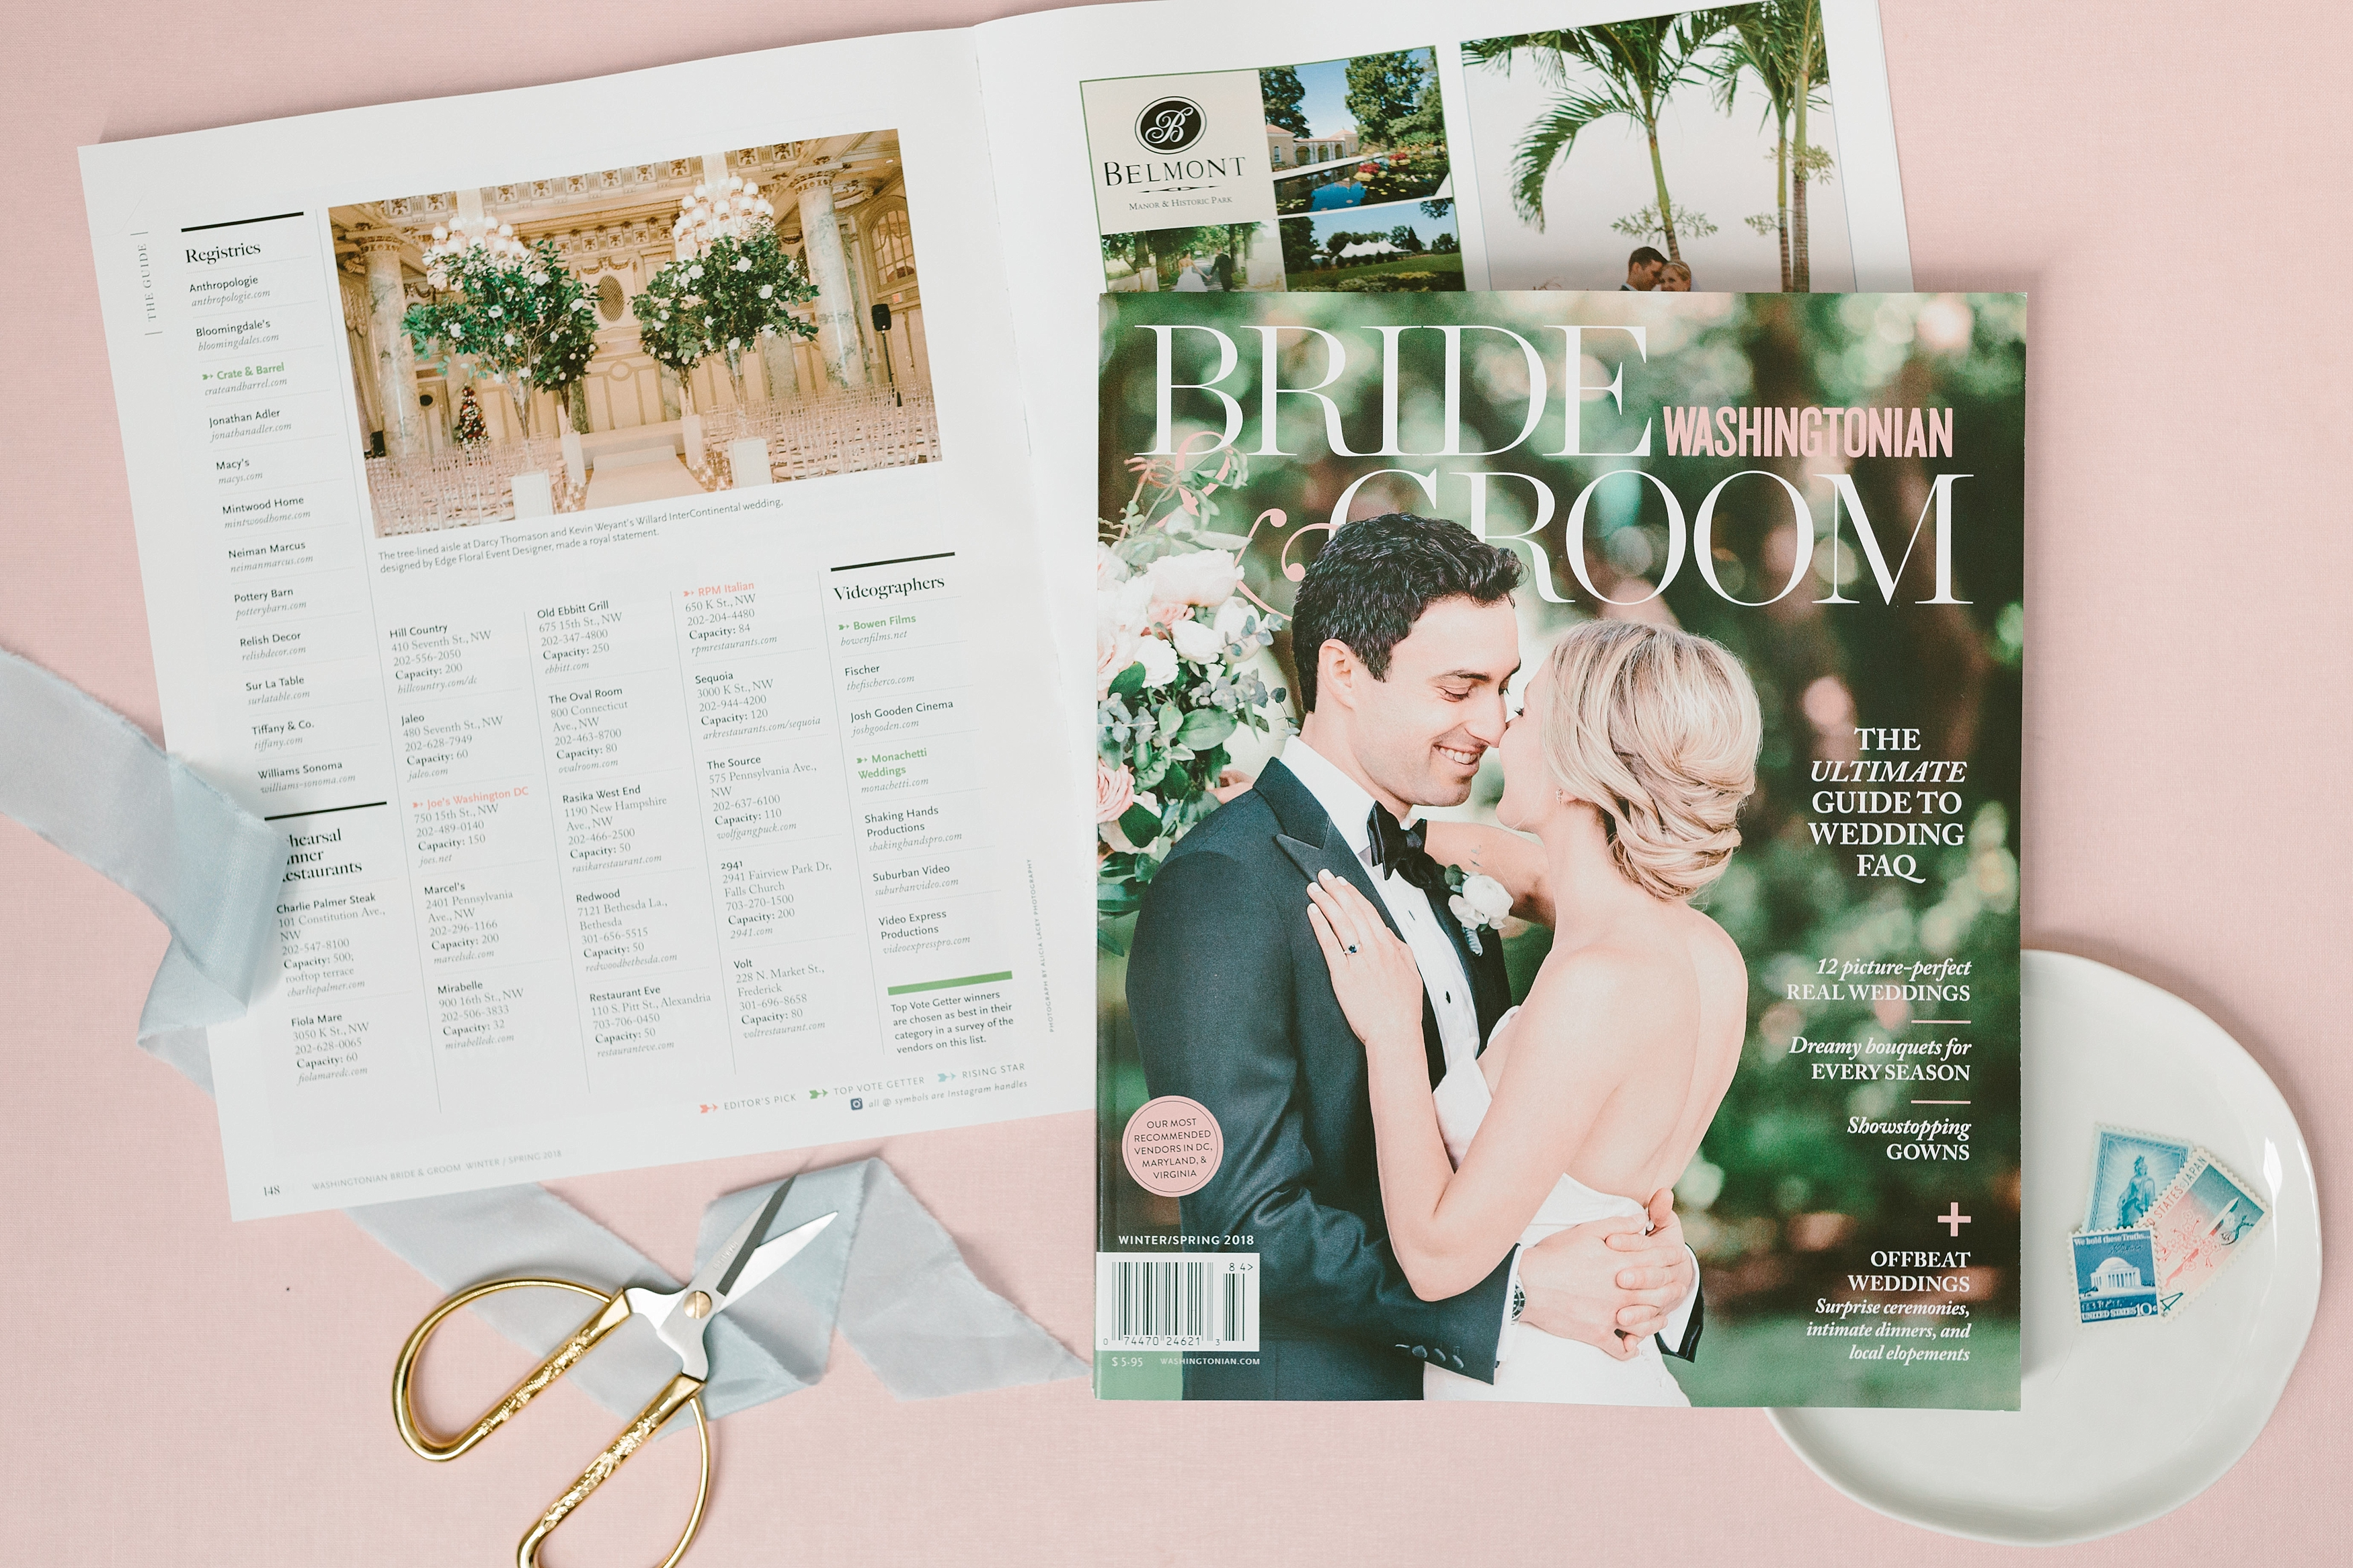 This Washington, DC wedding photographer two features in the latest issues of The Knot DMV and Washingtonian Bride and Groom Magazine.